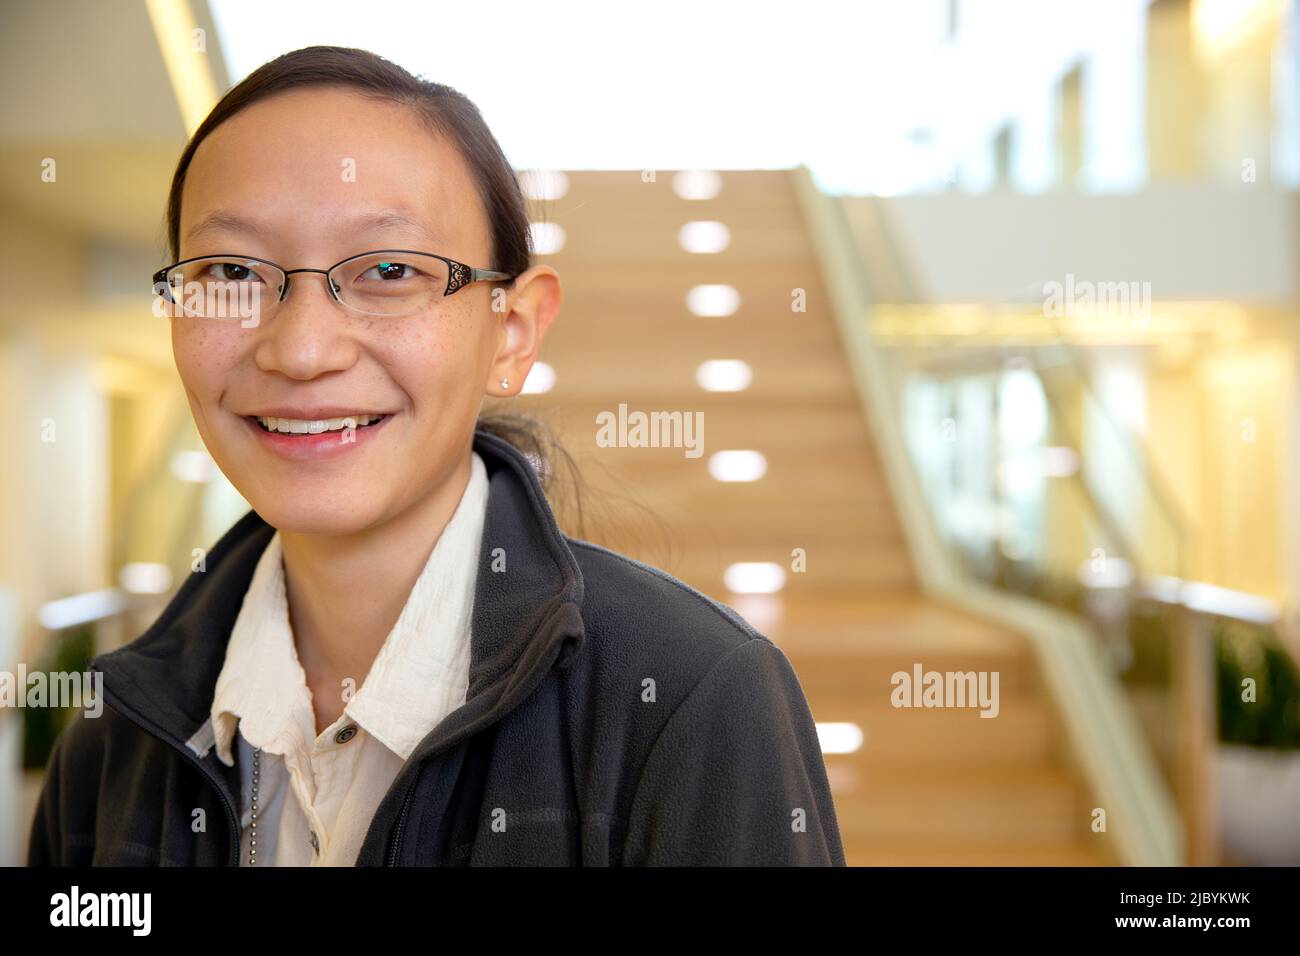 Portrait of young ethnic woman wearing glasses standing by stairwell in lobby of building, smiling looking towards camera Stock Photo